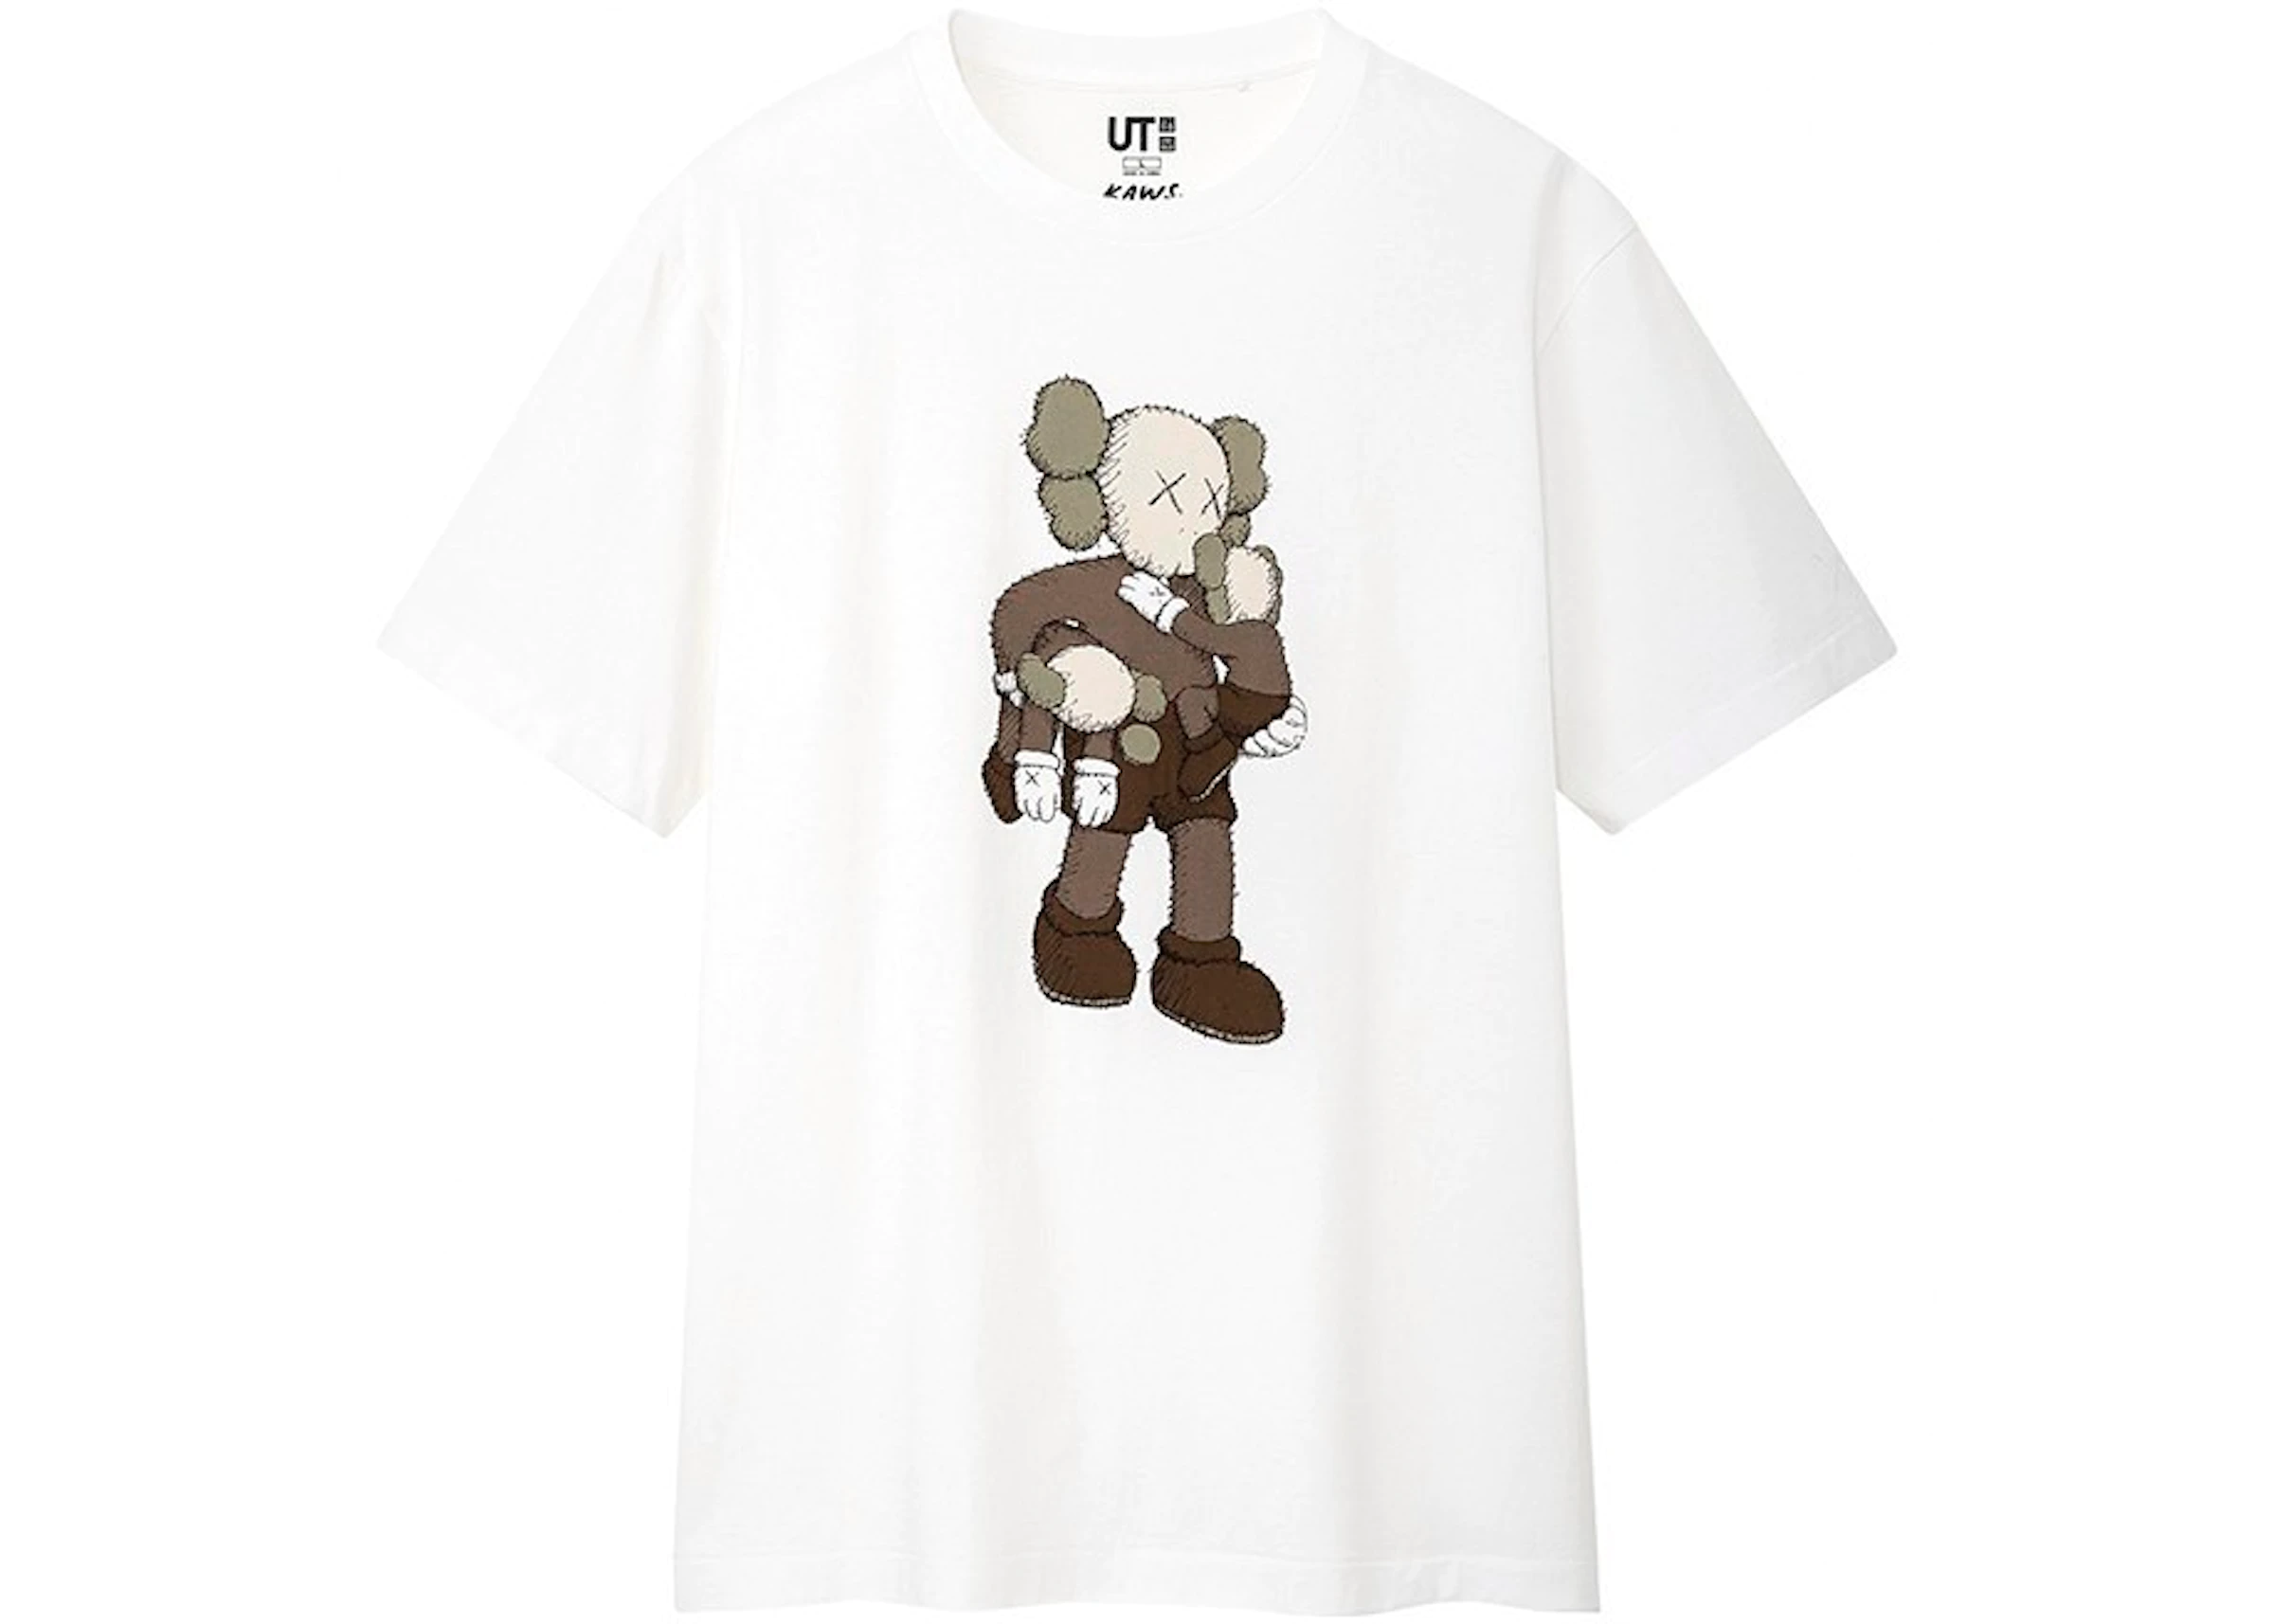 Intend crater Mutton KAWS x Uniqlo Clean Slate Tee (US Sizing) White - SS19 - US